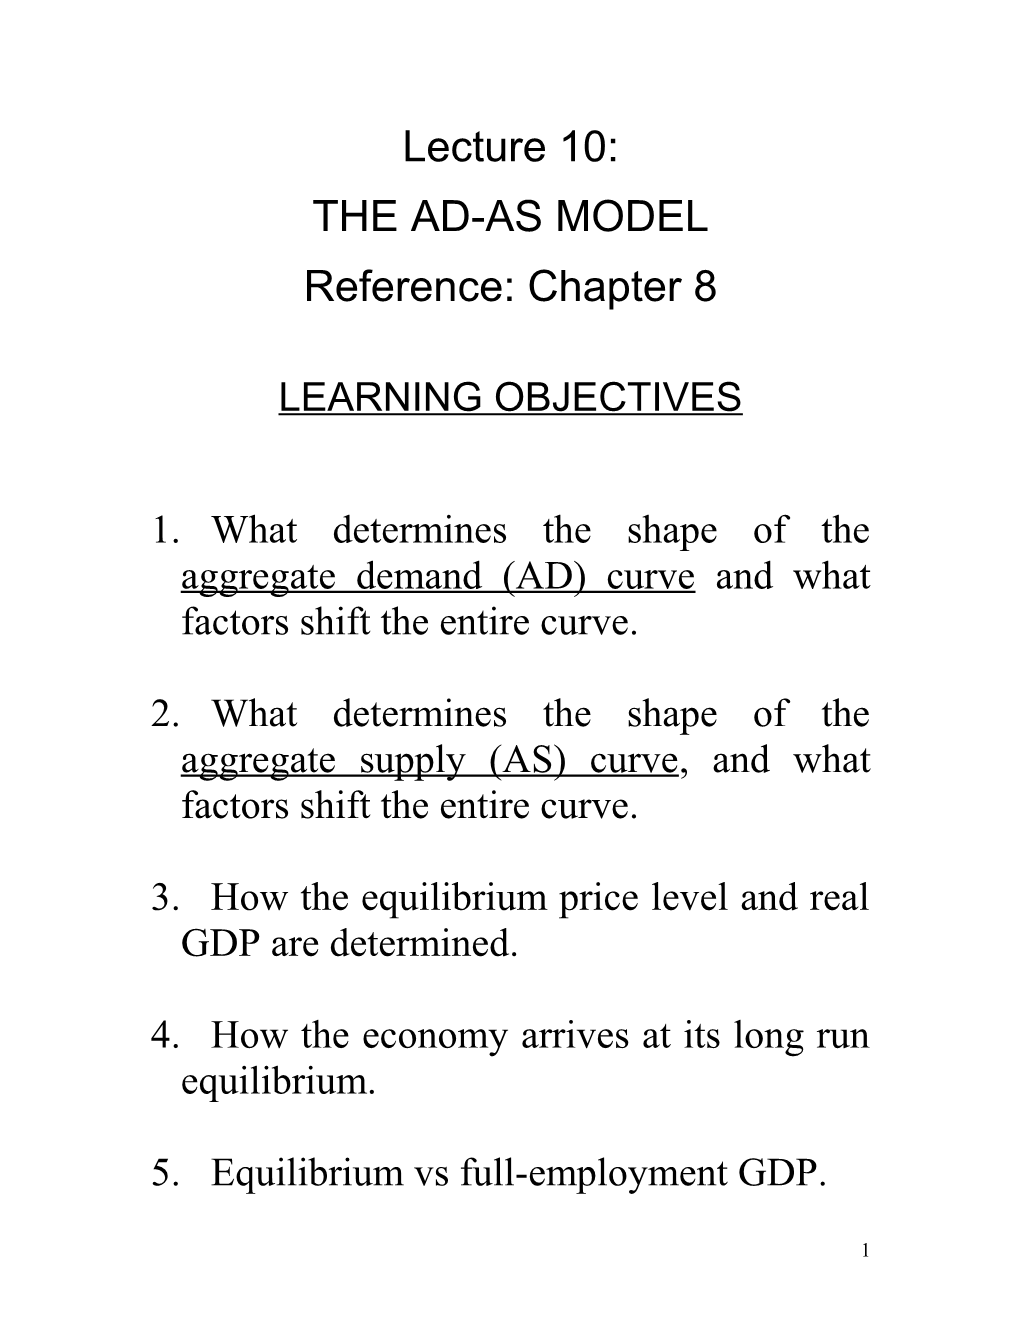 The Ad-As Model